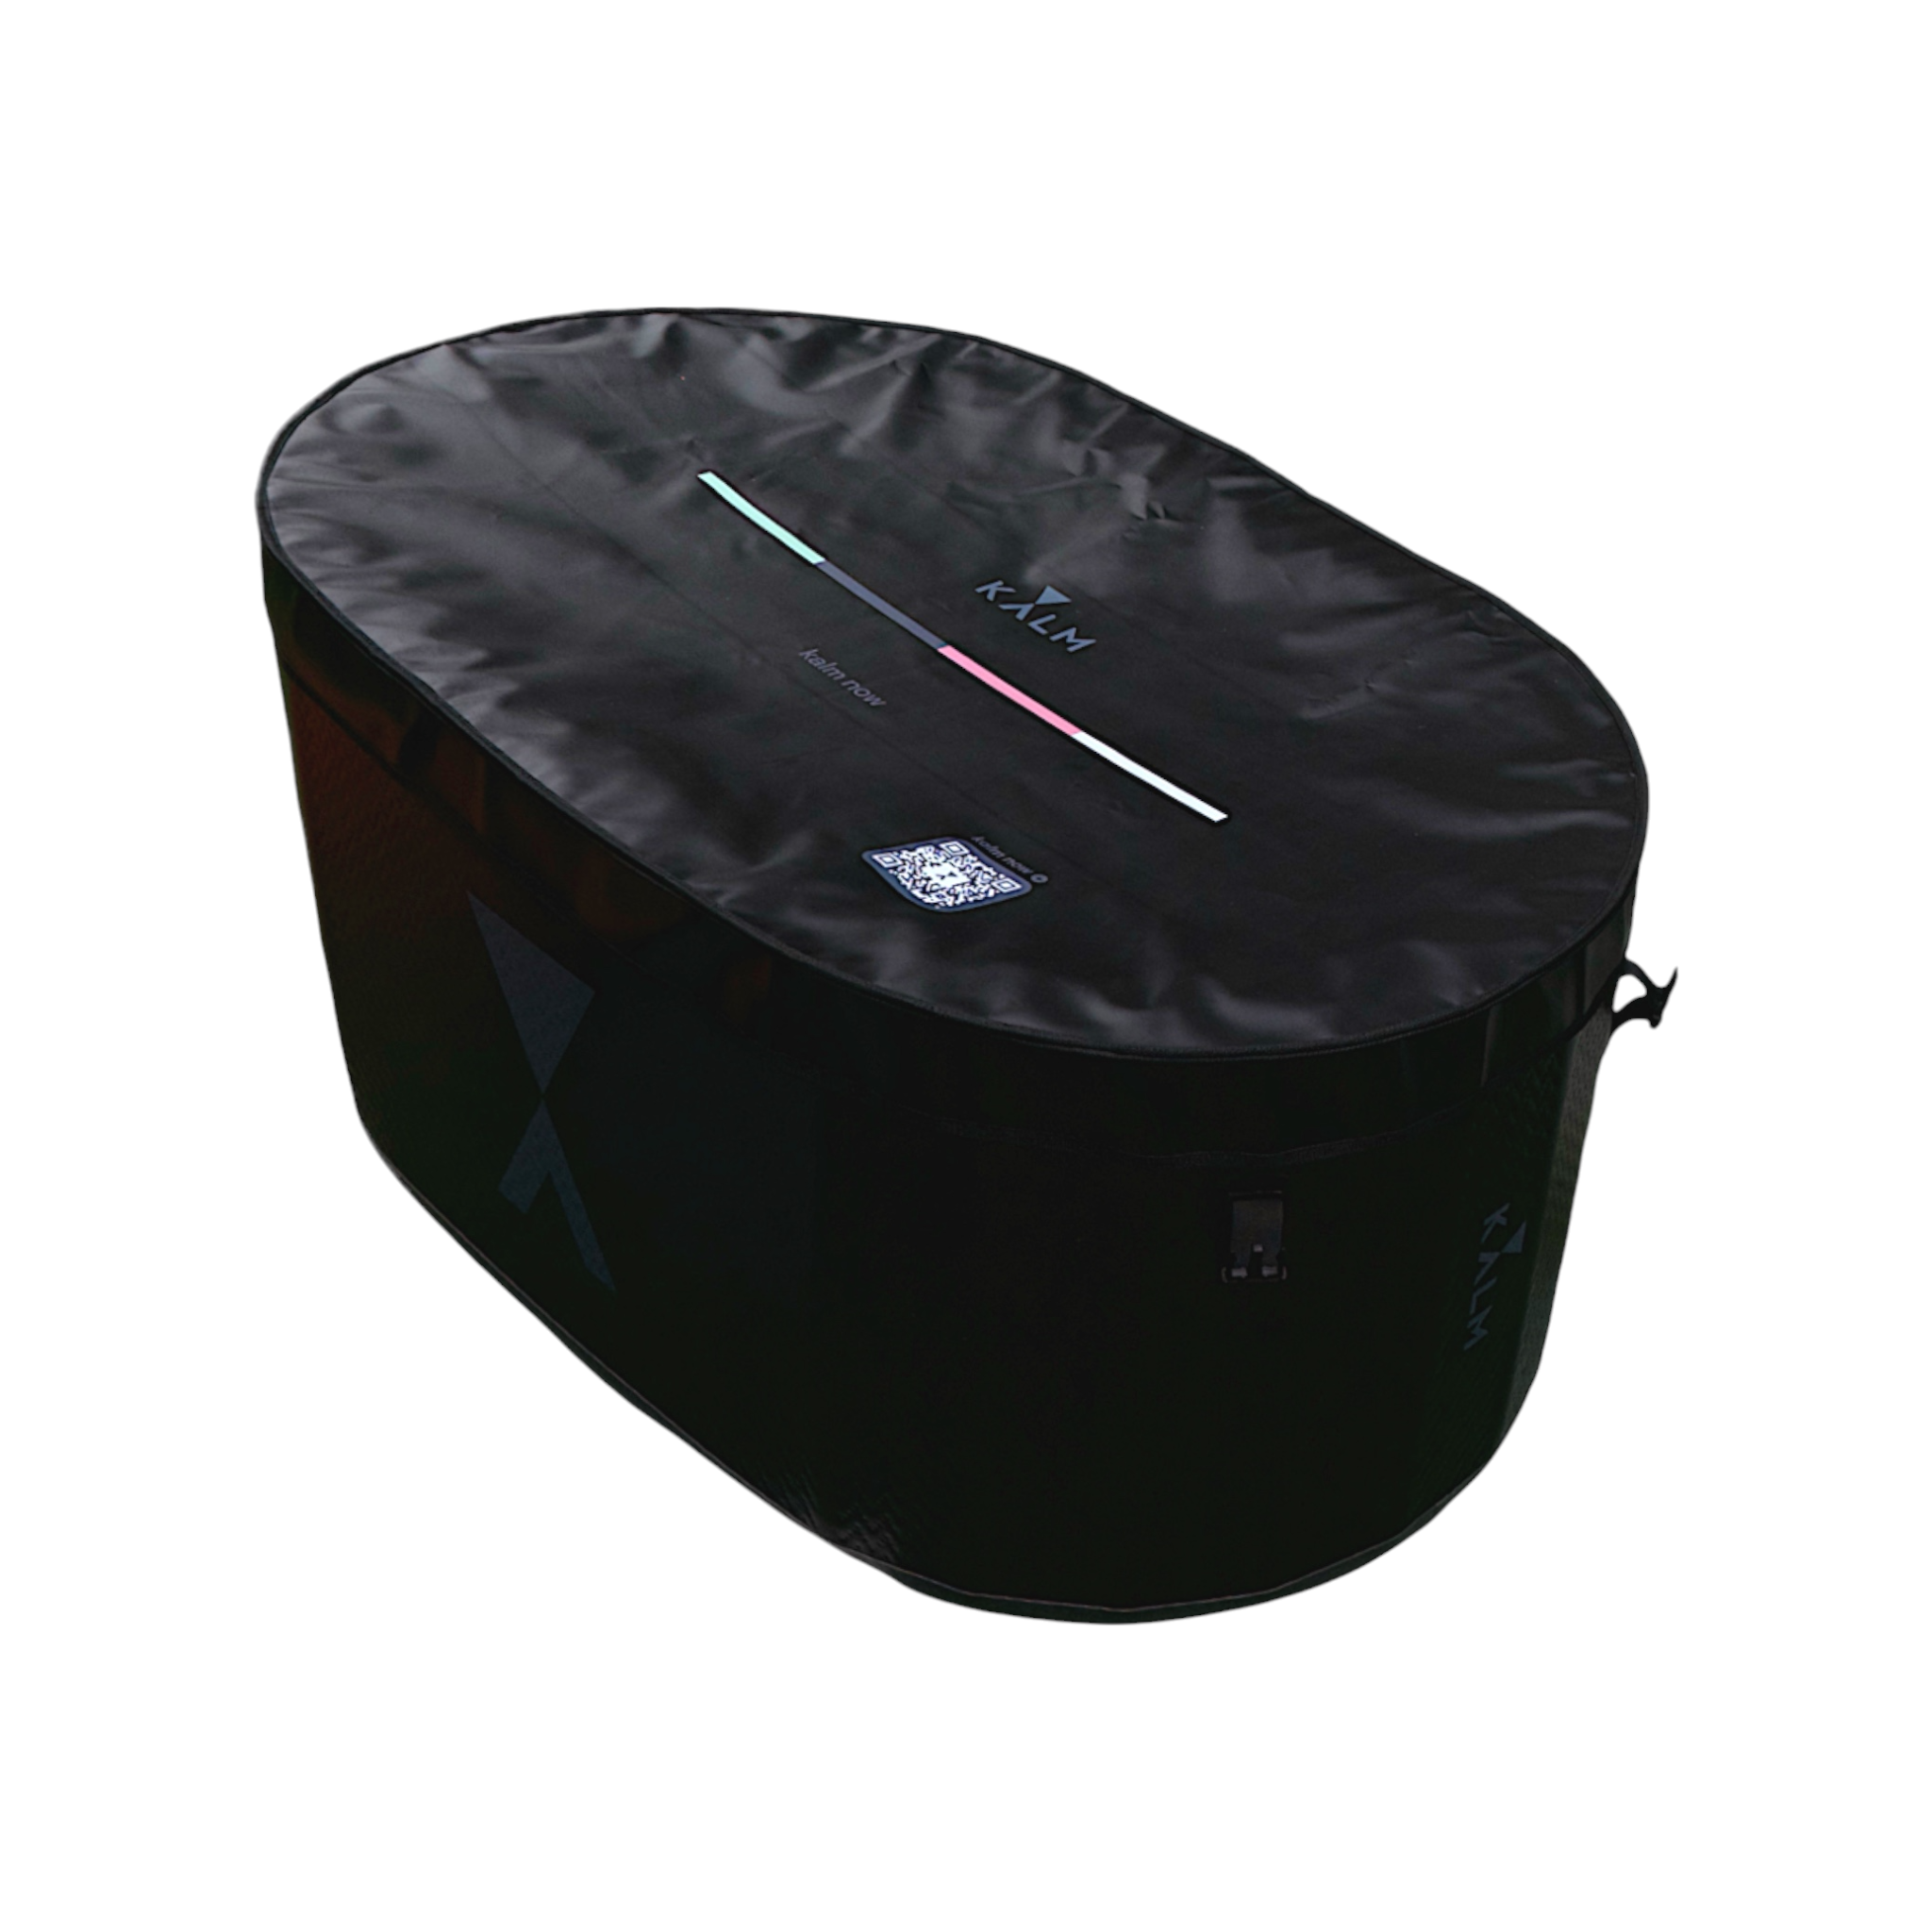 Kalm Inflatable Cold Plunge Tub - Fully Insulated and Portable